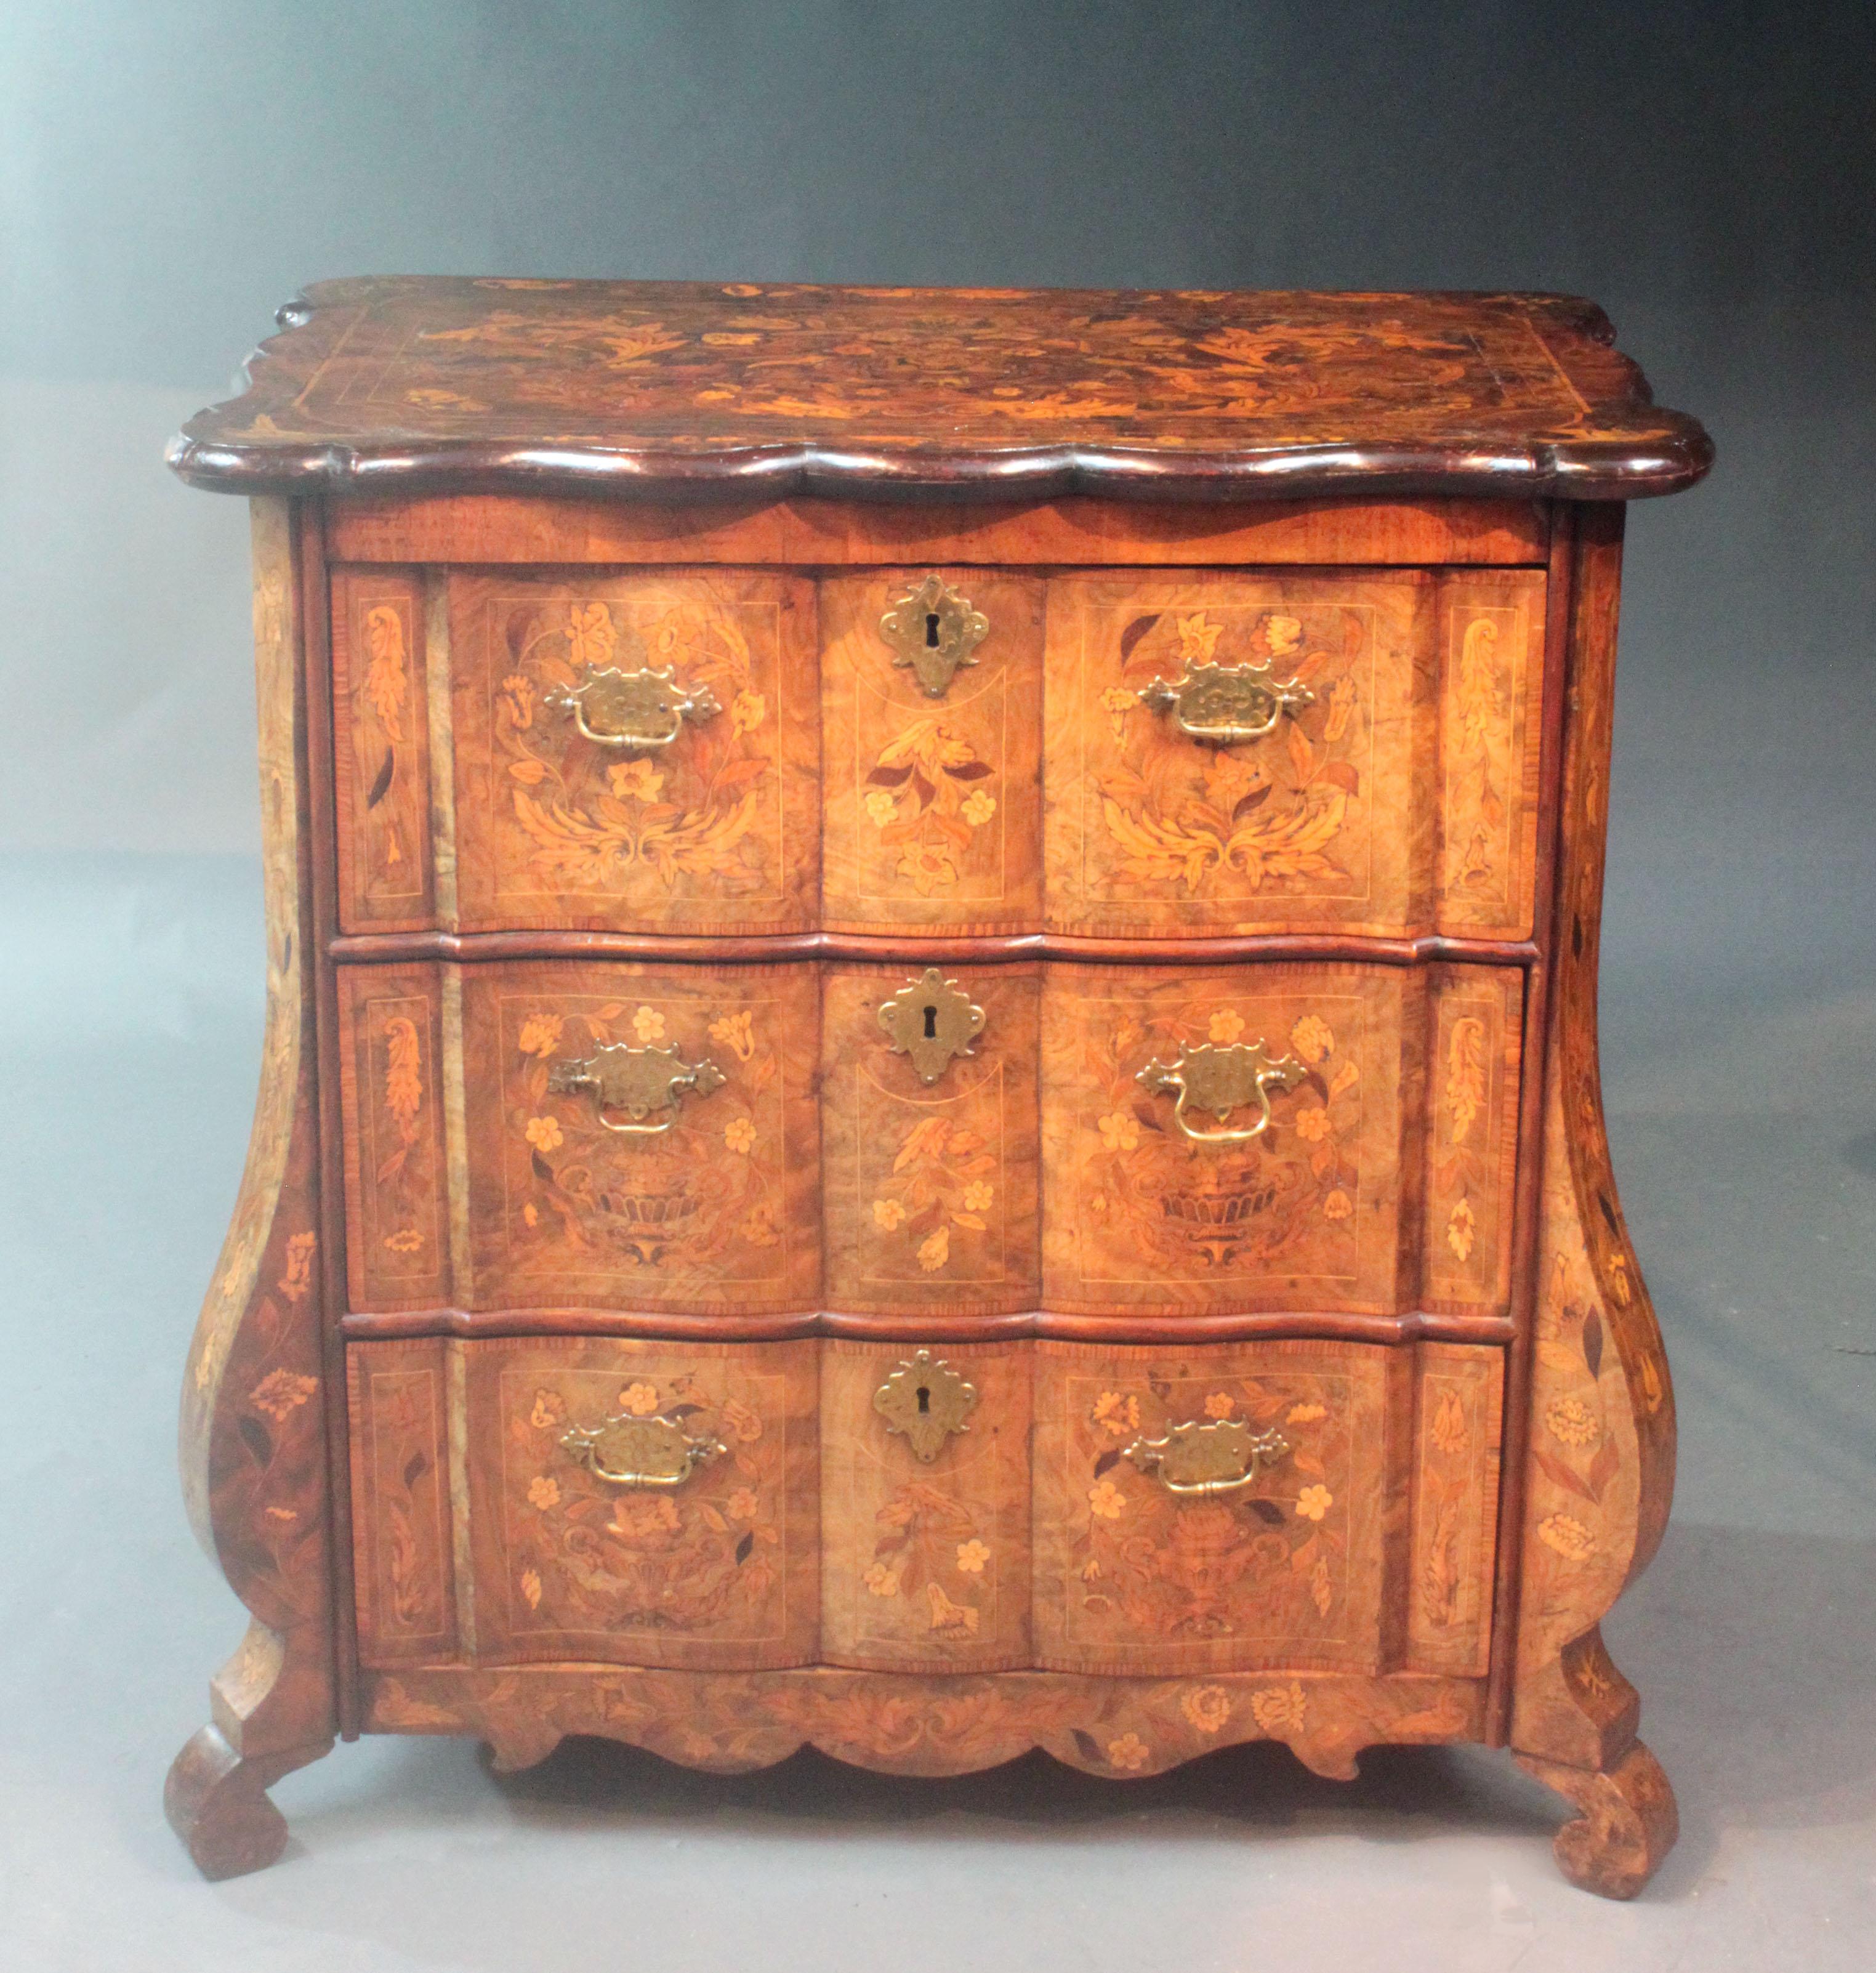 An attractive figured walnut Dutch chest with fine marquetry inlay of birds and flowers; most Dutch chests we have had previously had bombay fronts and often ball and claw feet but I really like this more unusual serpentine shape and top and the